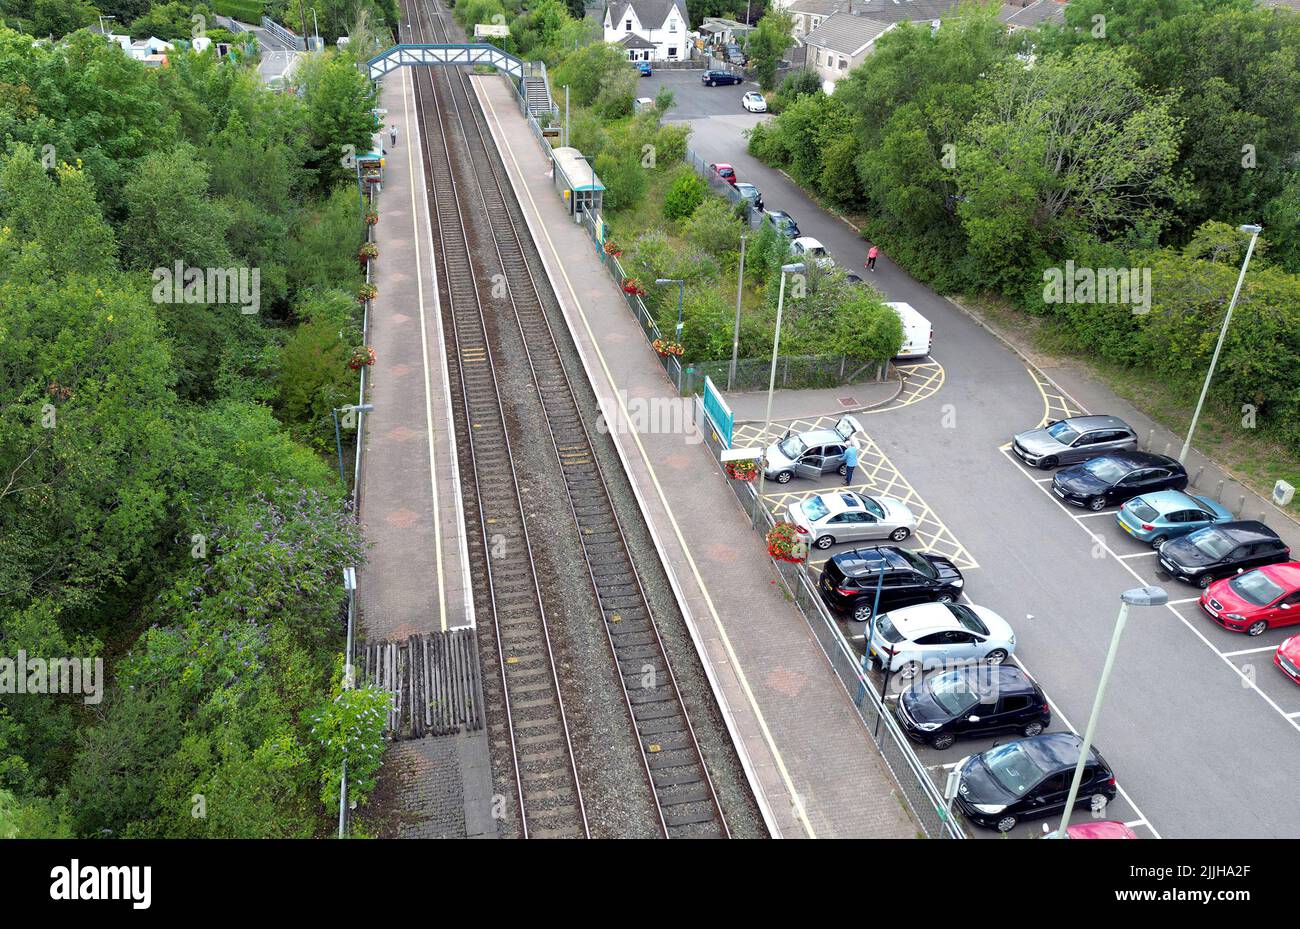 Pontyclun, Wales - July 2022: Aerial view of the railway station and park and ride car park in the village of Pontyclun in South Wales Stock Photo